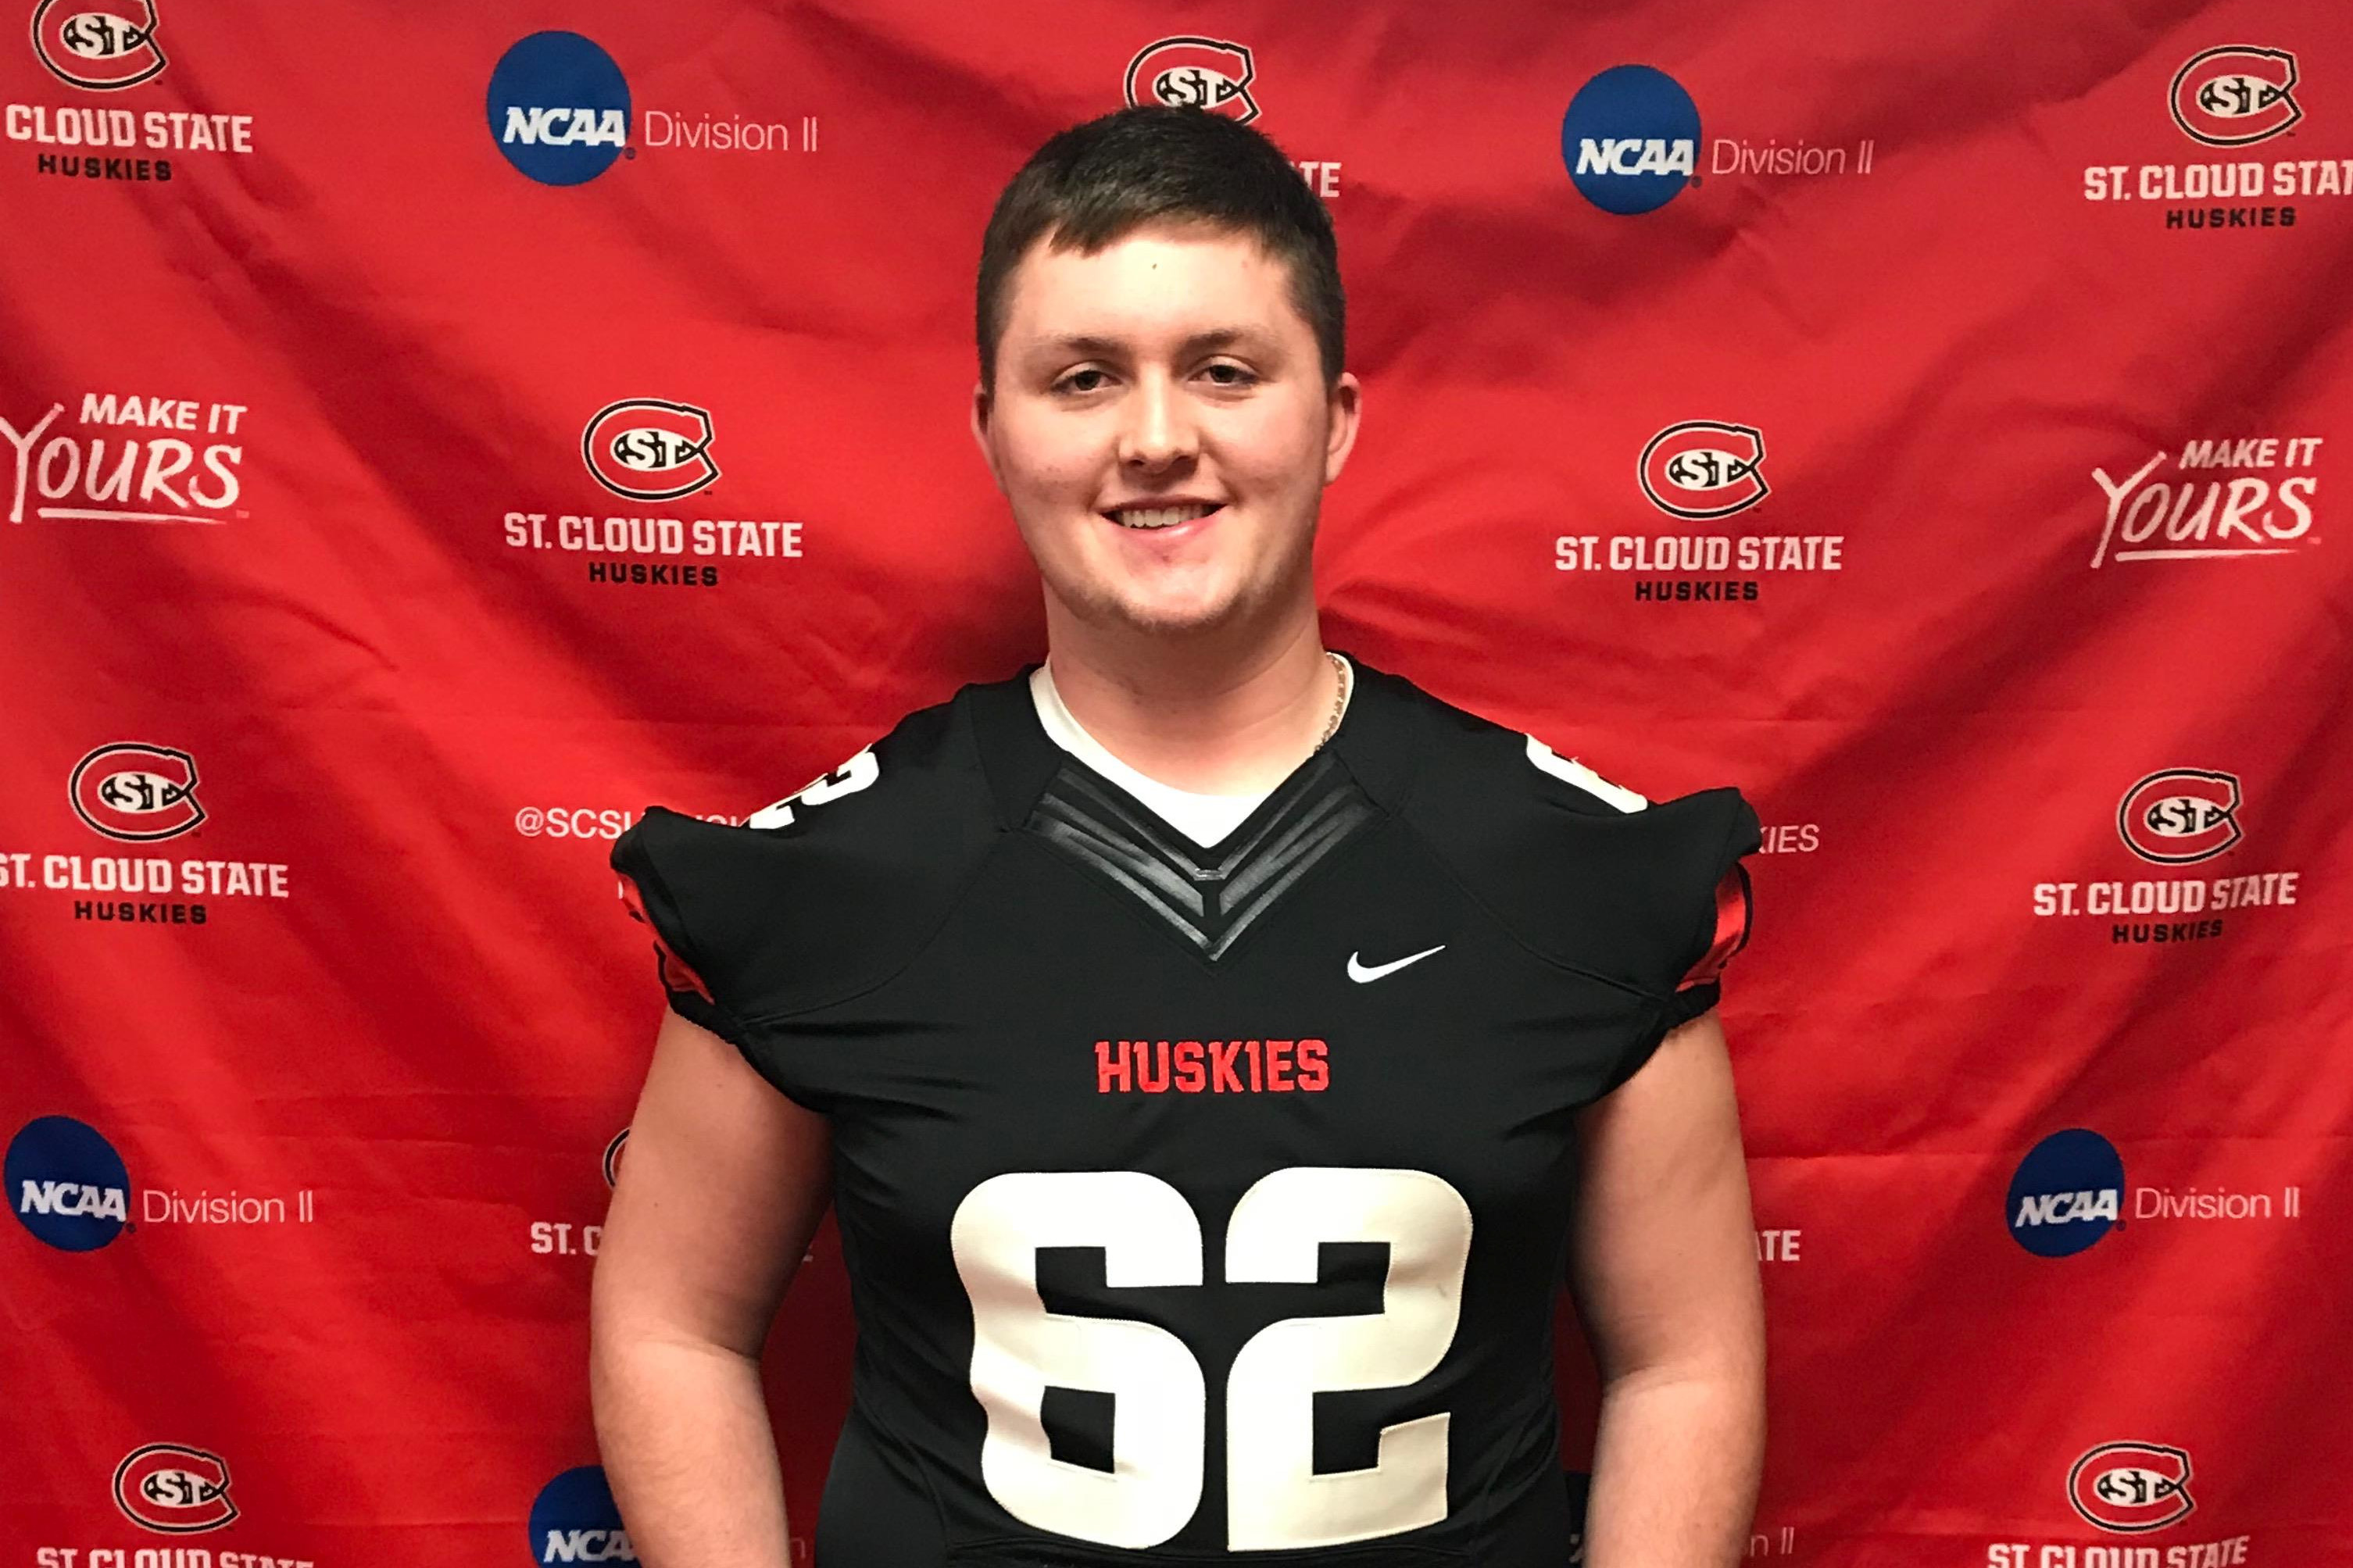 Rotter commits to St. Cloud State